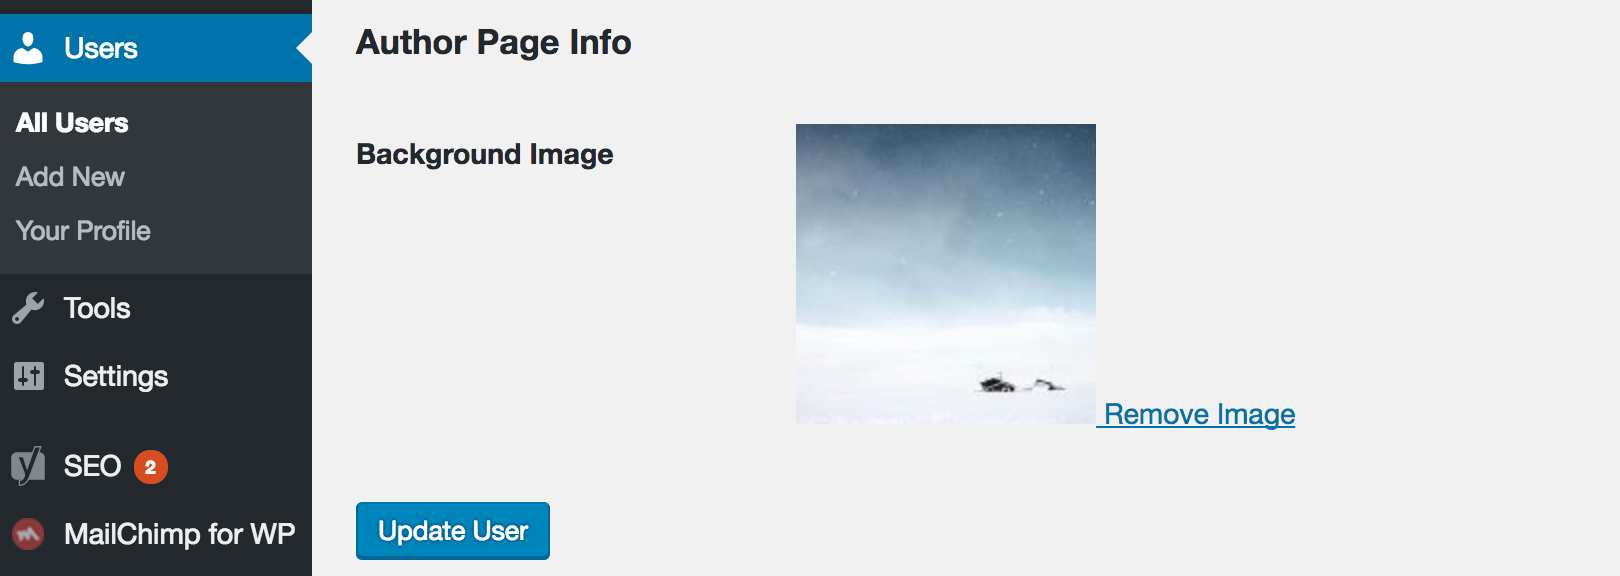 Upload a background image for Author Archive Page Header